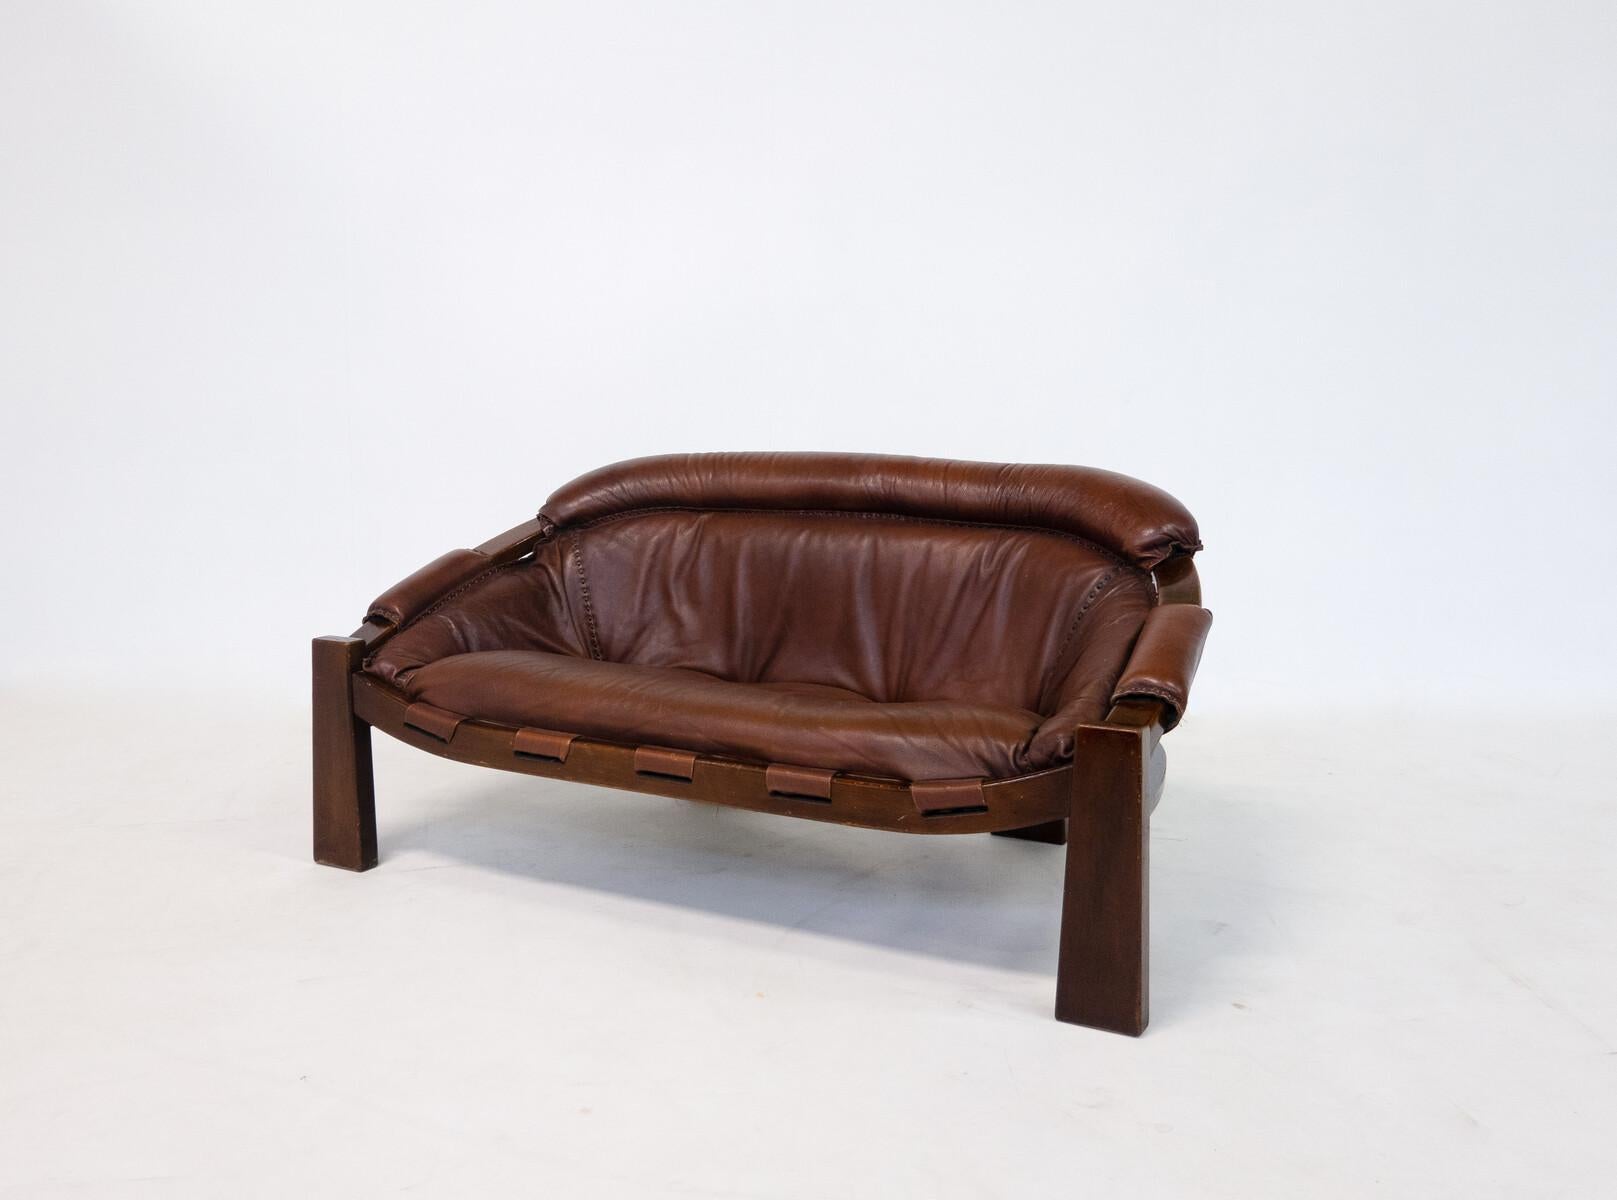 Mid-Century Modern Italian Sofa by Luciano Frigerio, Leather, 1970s For Sale 9